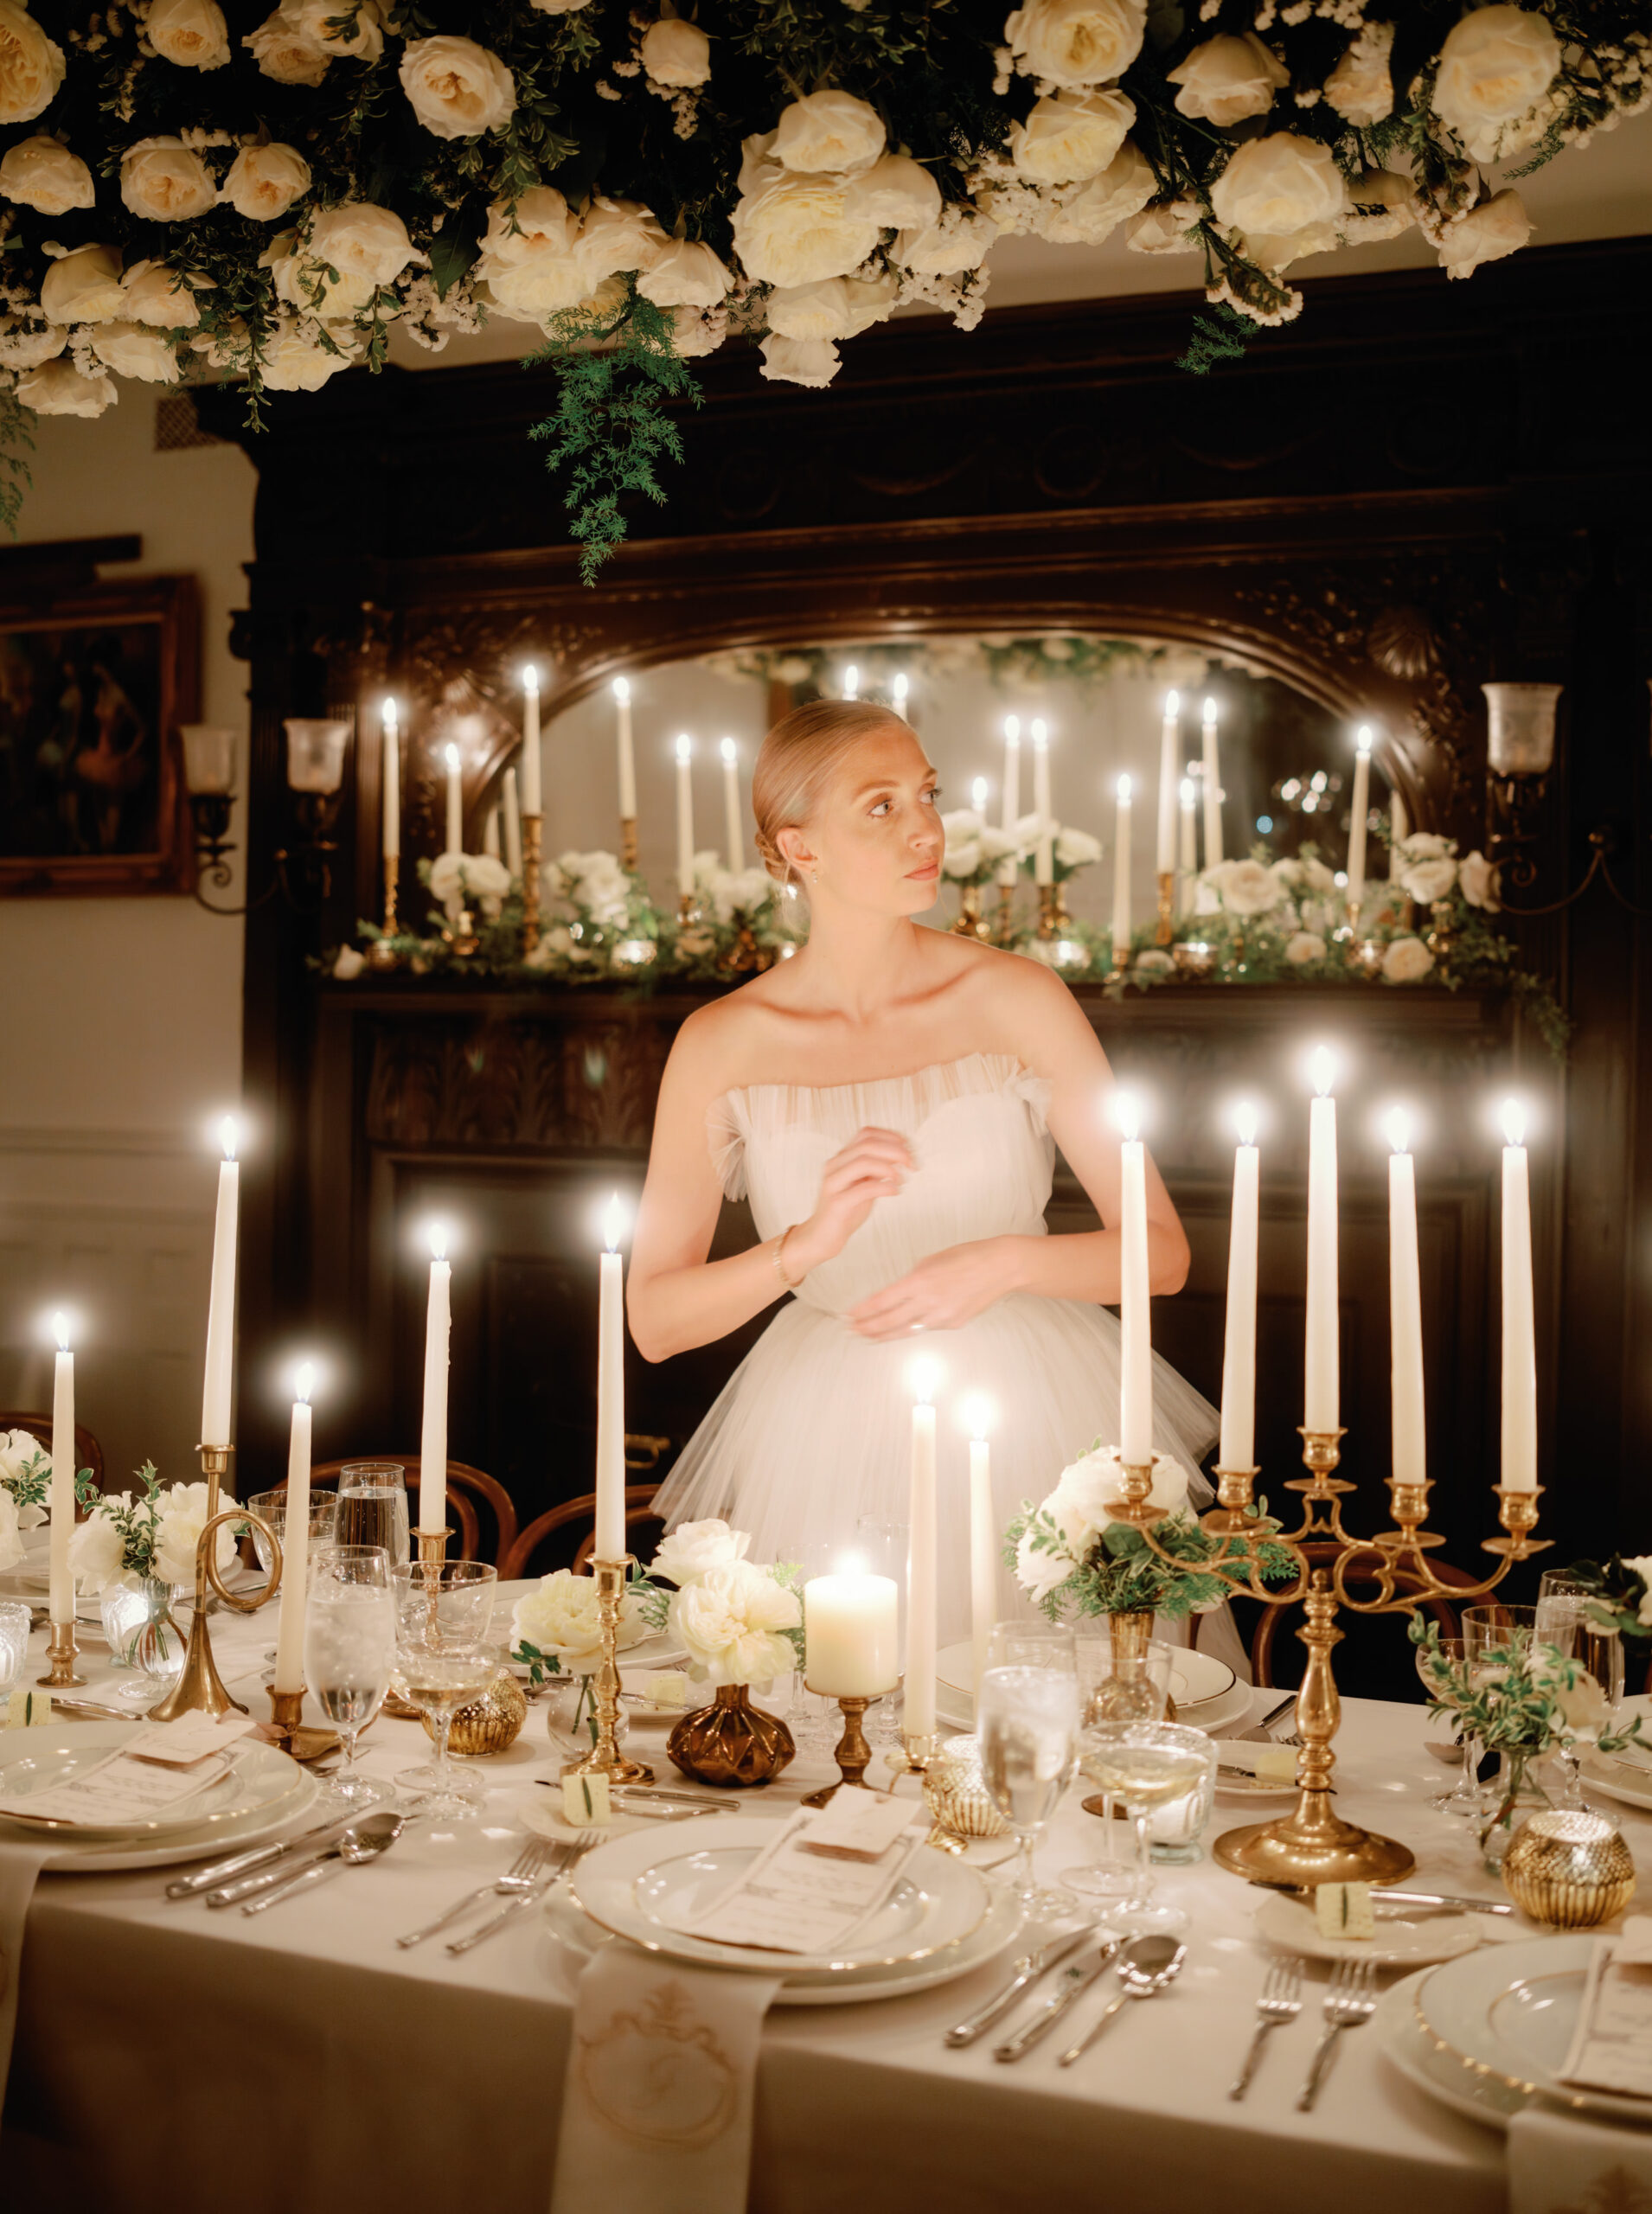 Editorial photo of the bride beside the dining table. Image by Jenny Fu Studio